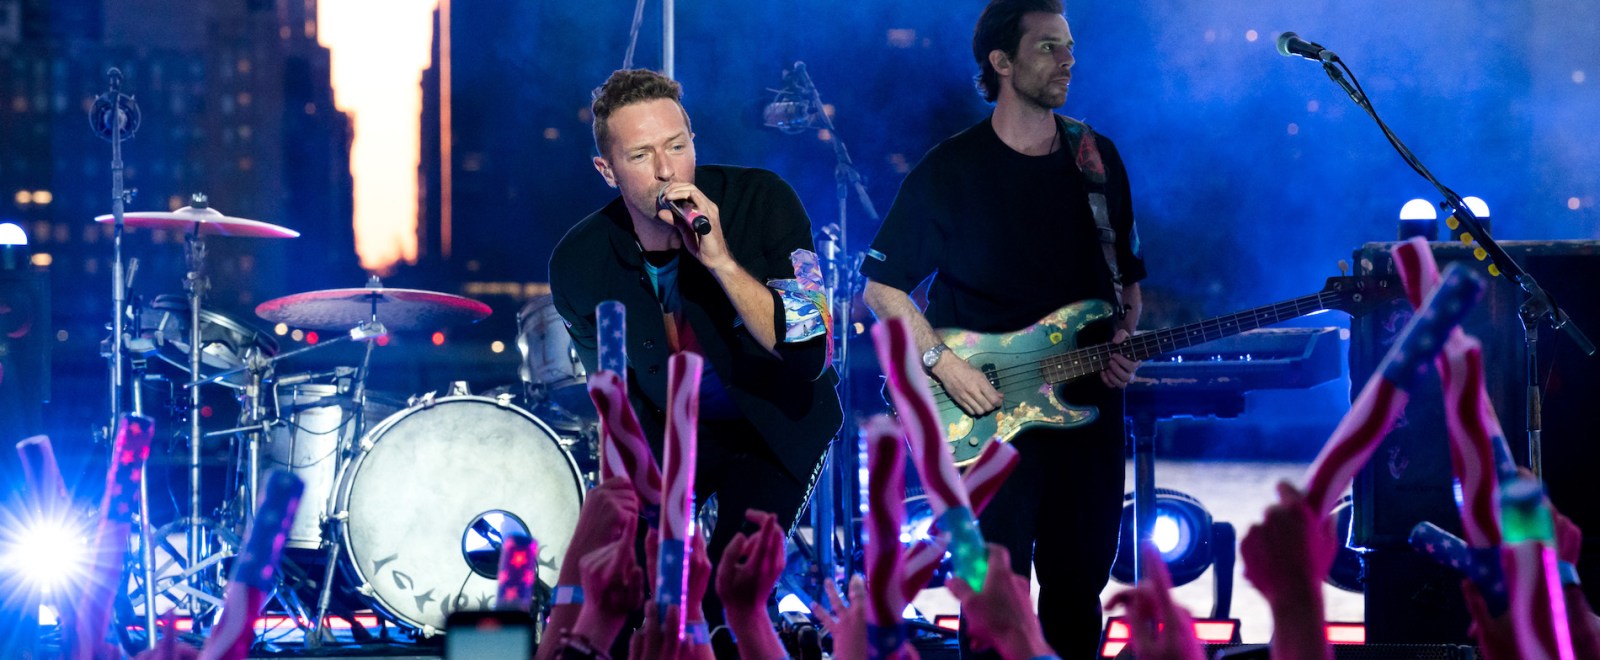 coldplay-Kevin-Polizzotto-NBCUniversal-full.jpg